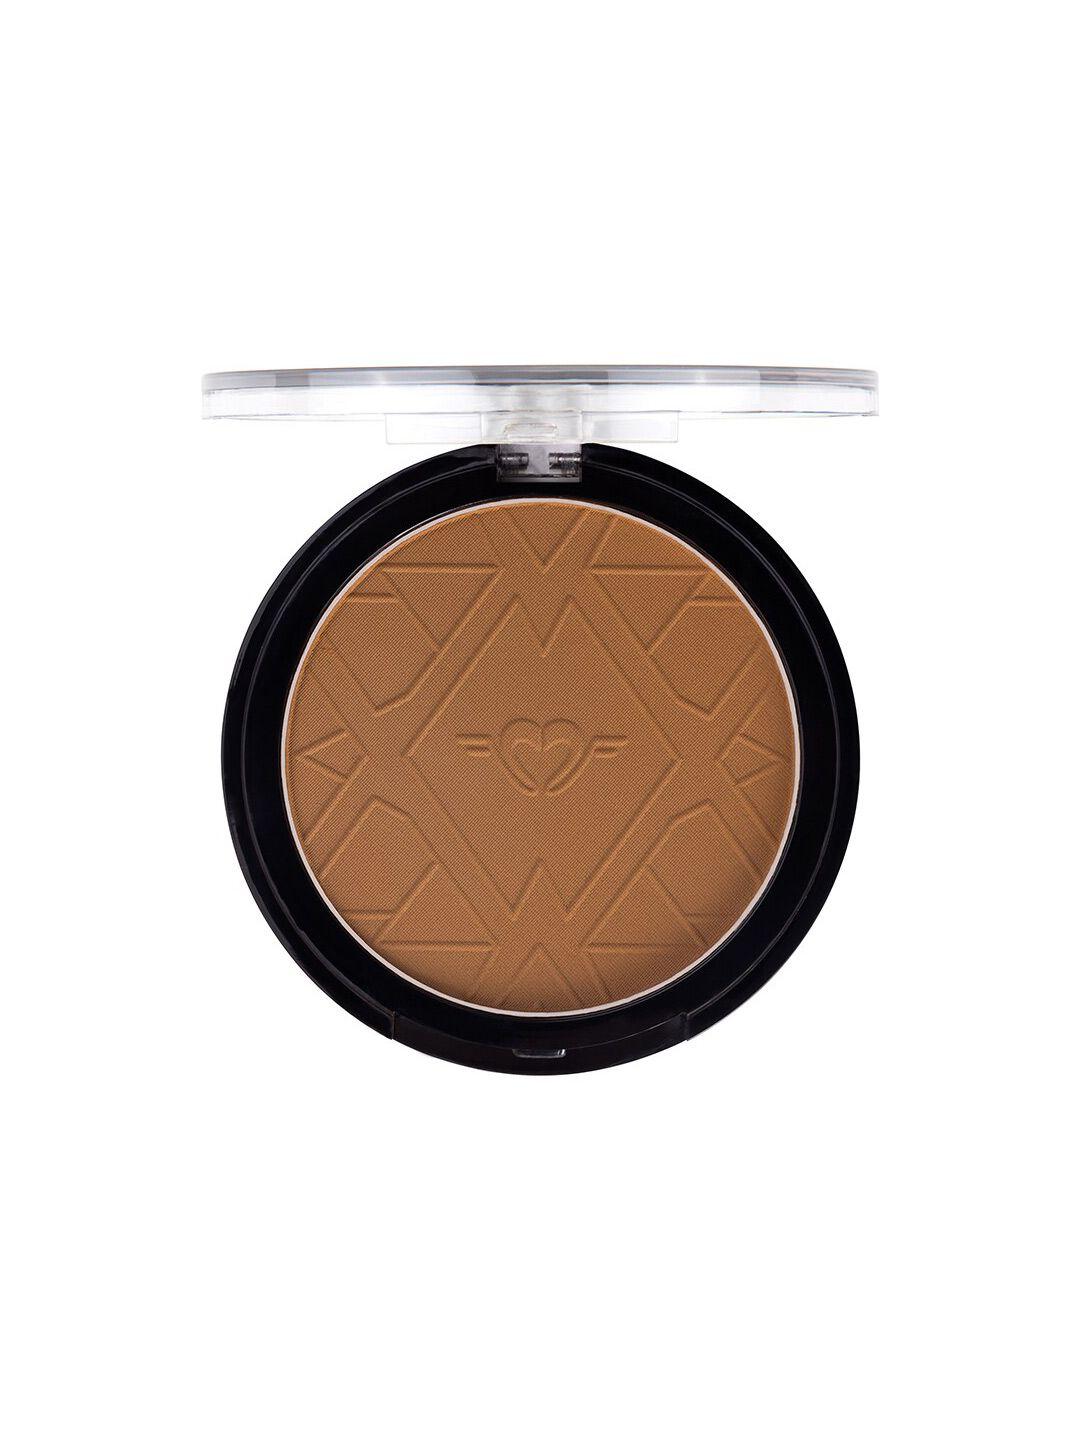 daily life forever52 flawless fusion bronzer 12 g - golden brown 05